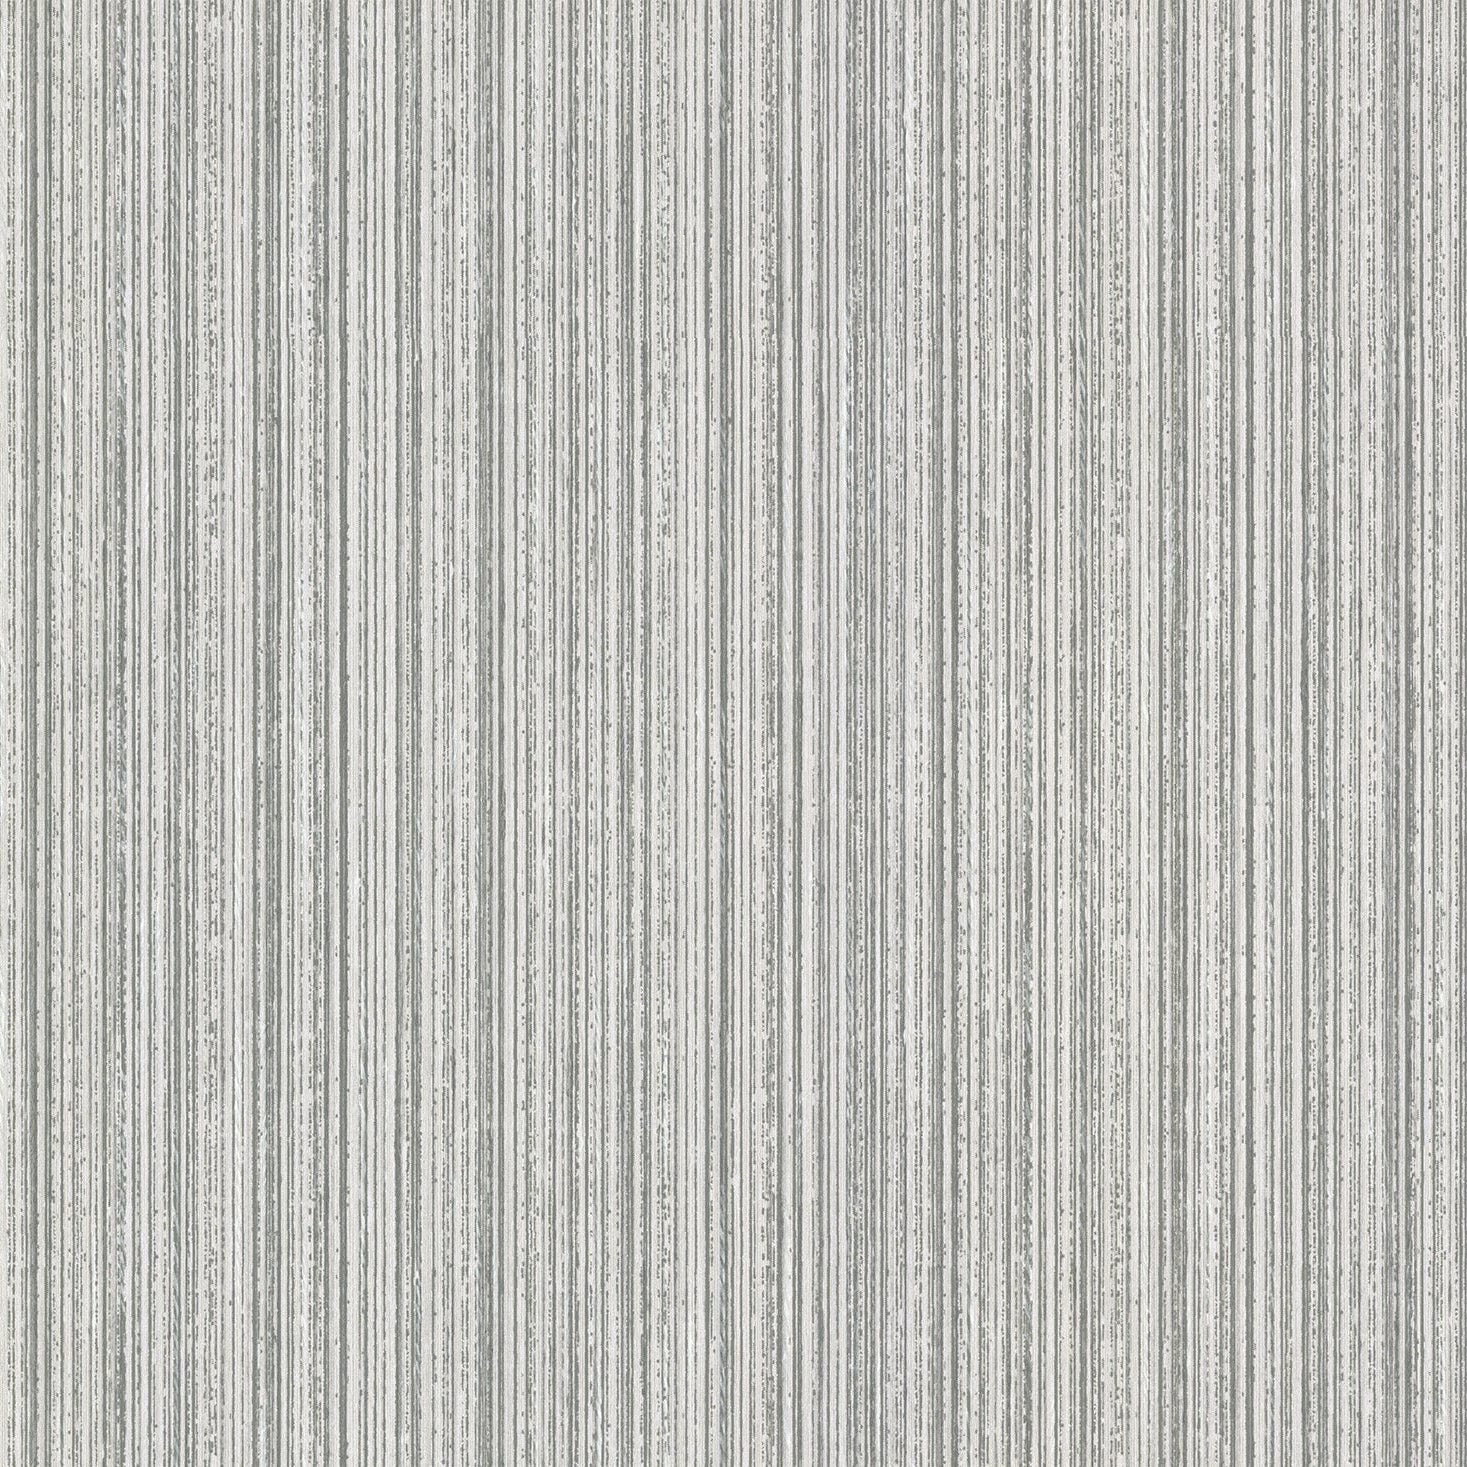 Acquire 2767-23781 Salois Light Grey Texture Techniques & Finishes III Brewster